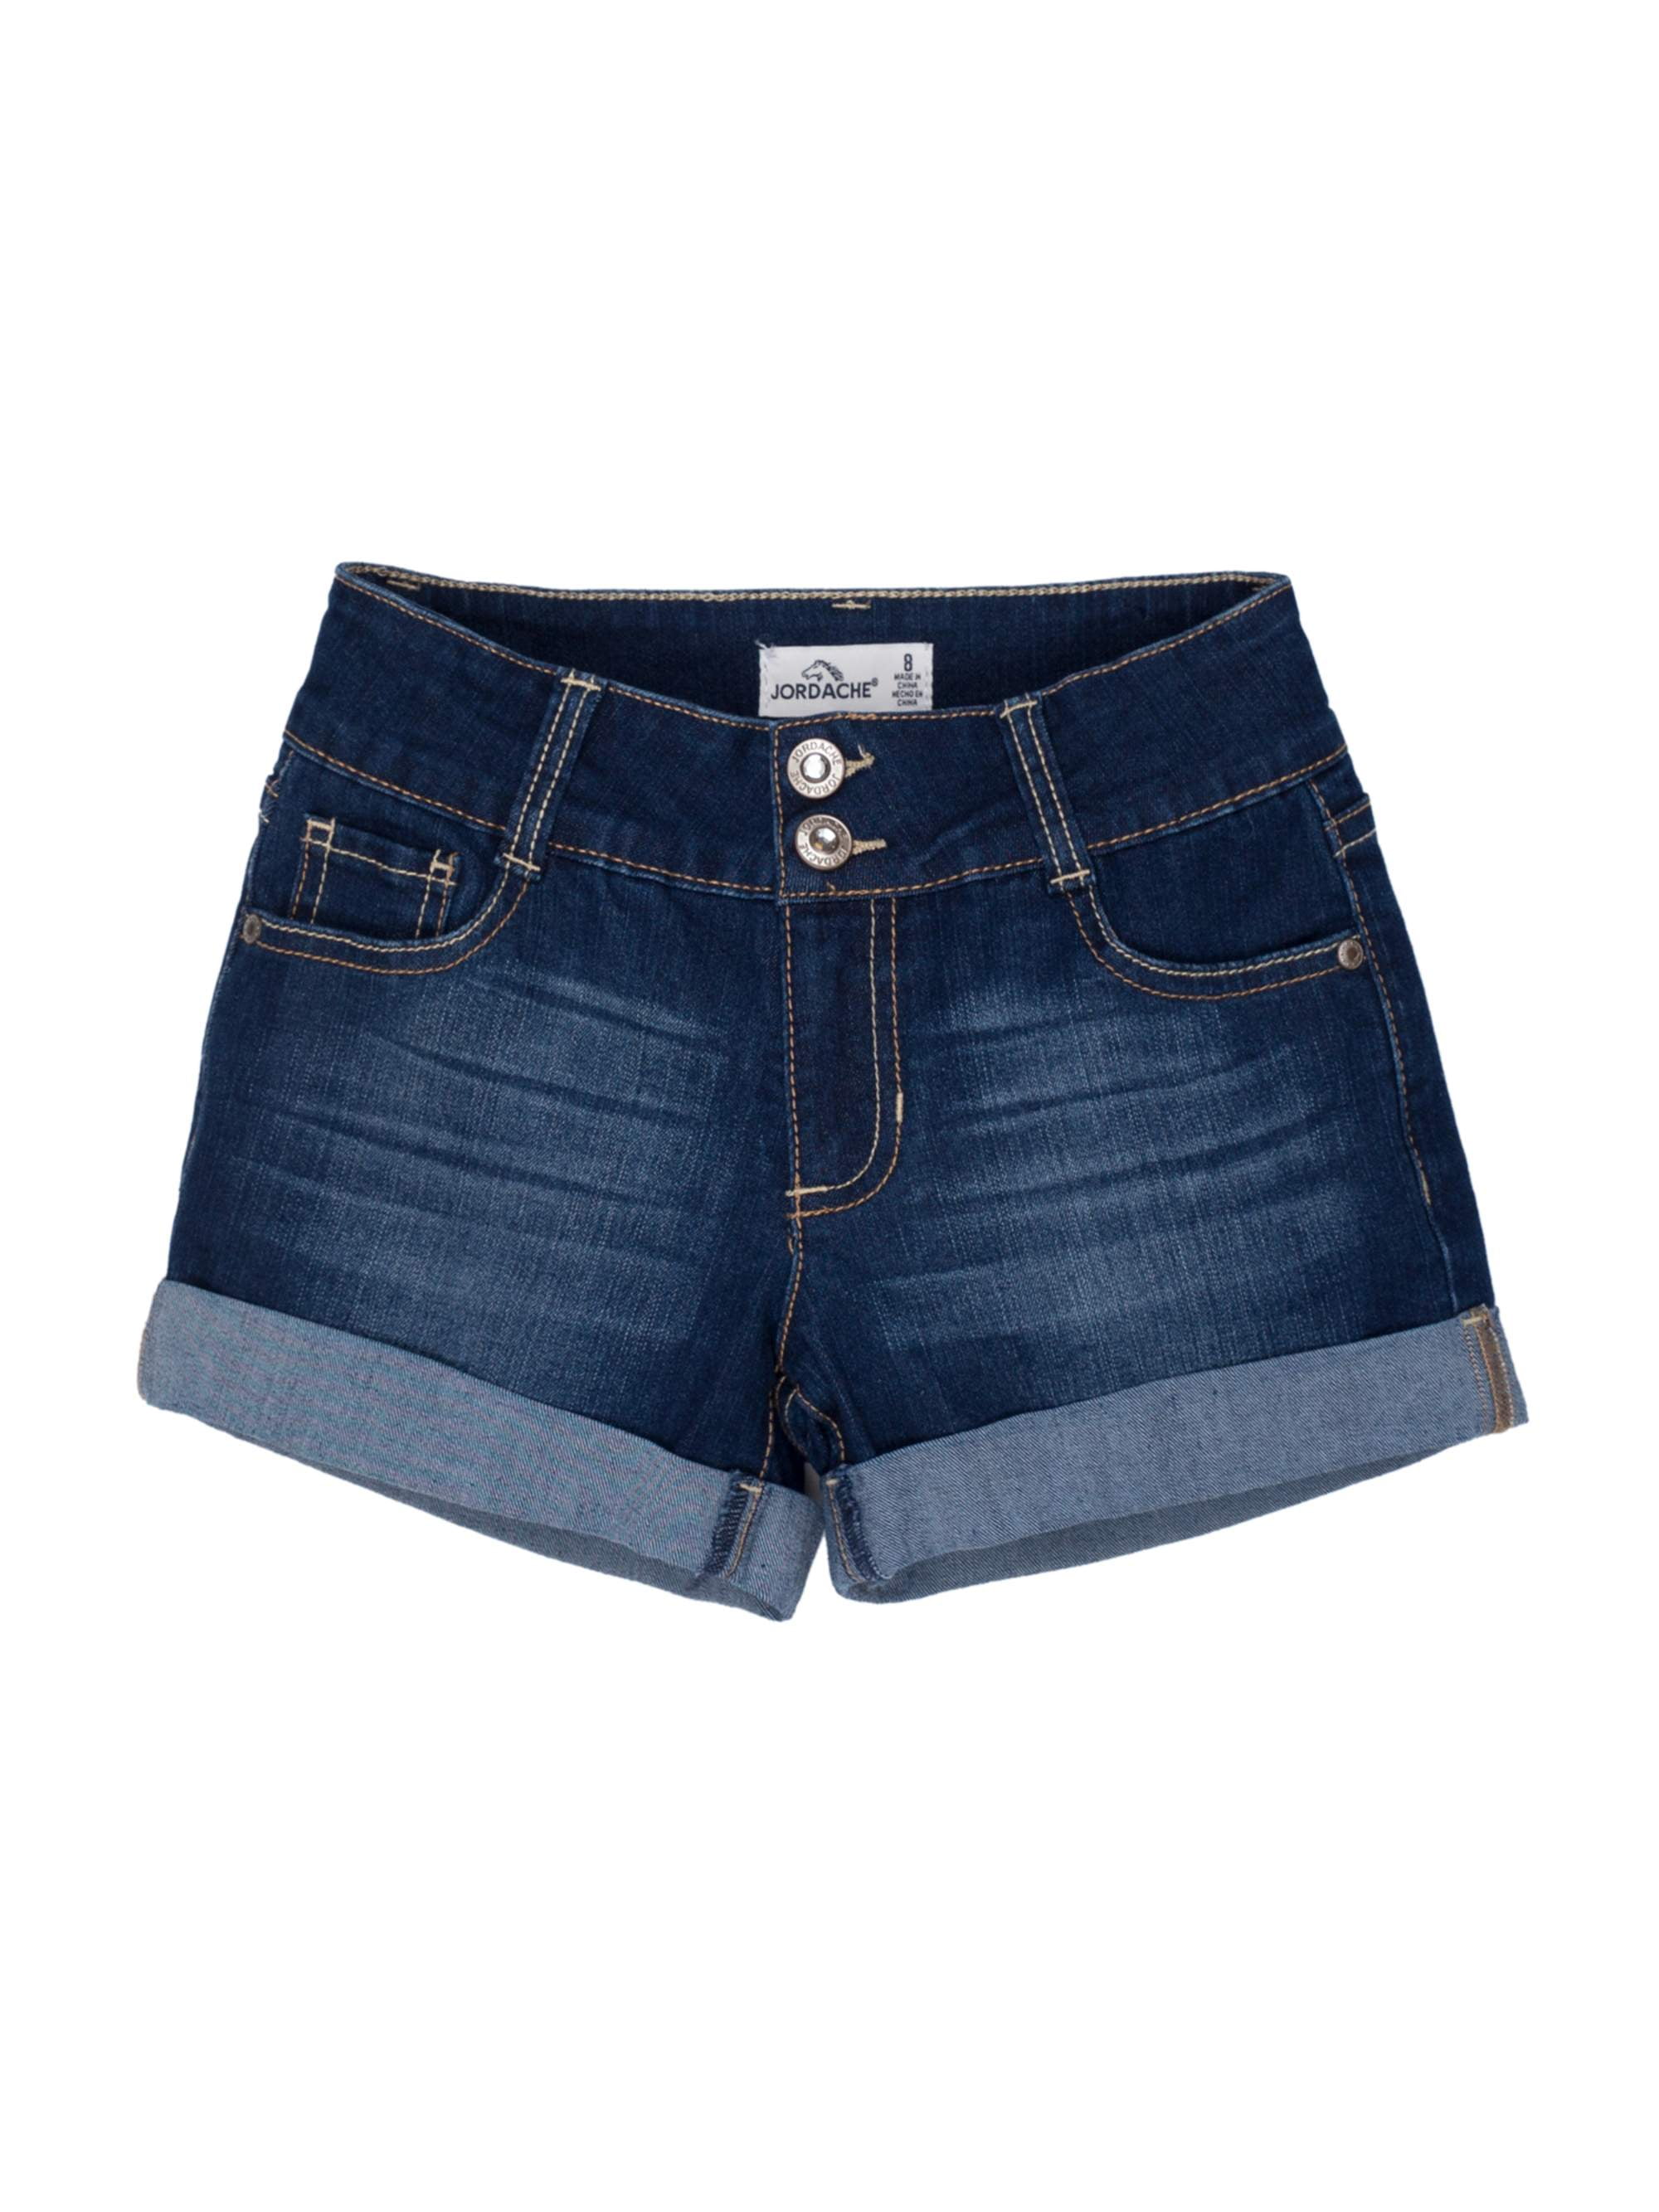 jean shorts for girls